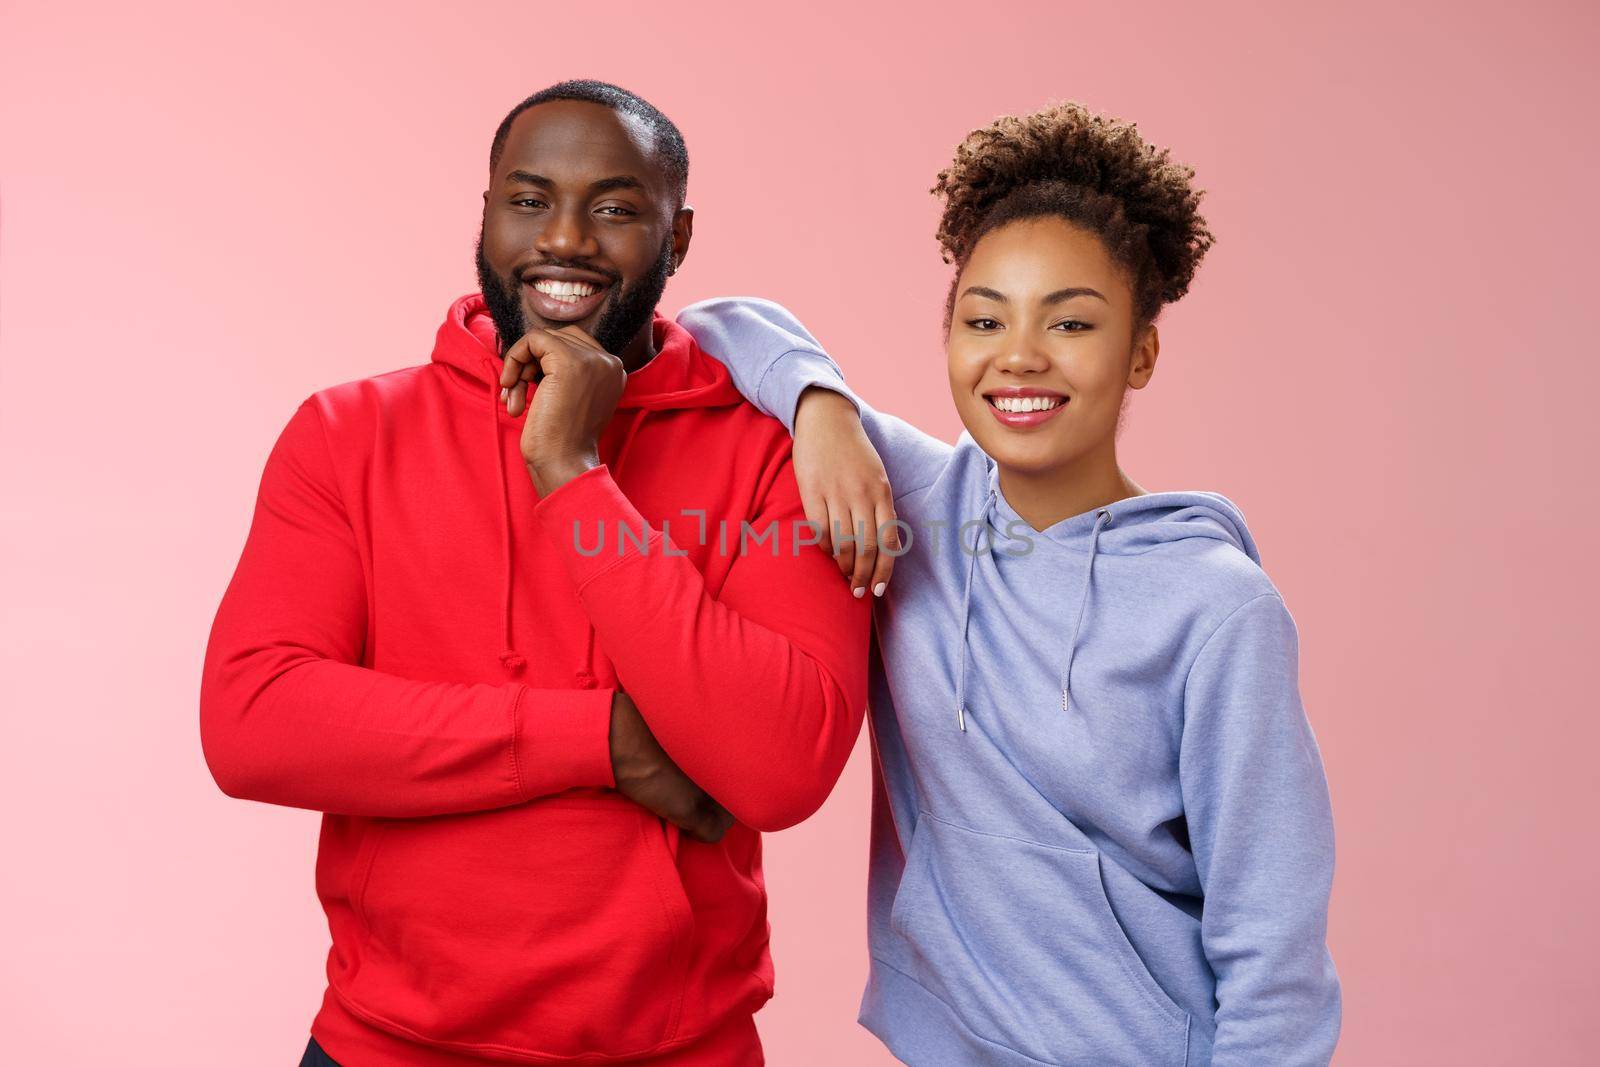 Romantic couple best friends standing pink background girl leaning boyfriend shoulder smiling broadly feel love respect each other working team standing pleased delighted friendly look camera.